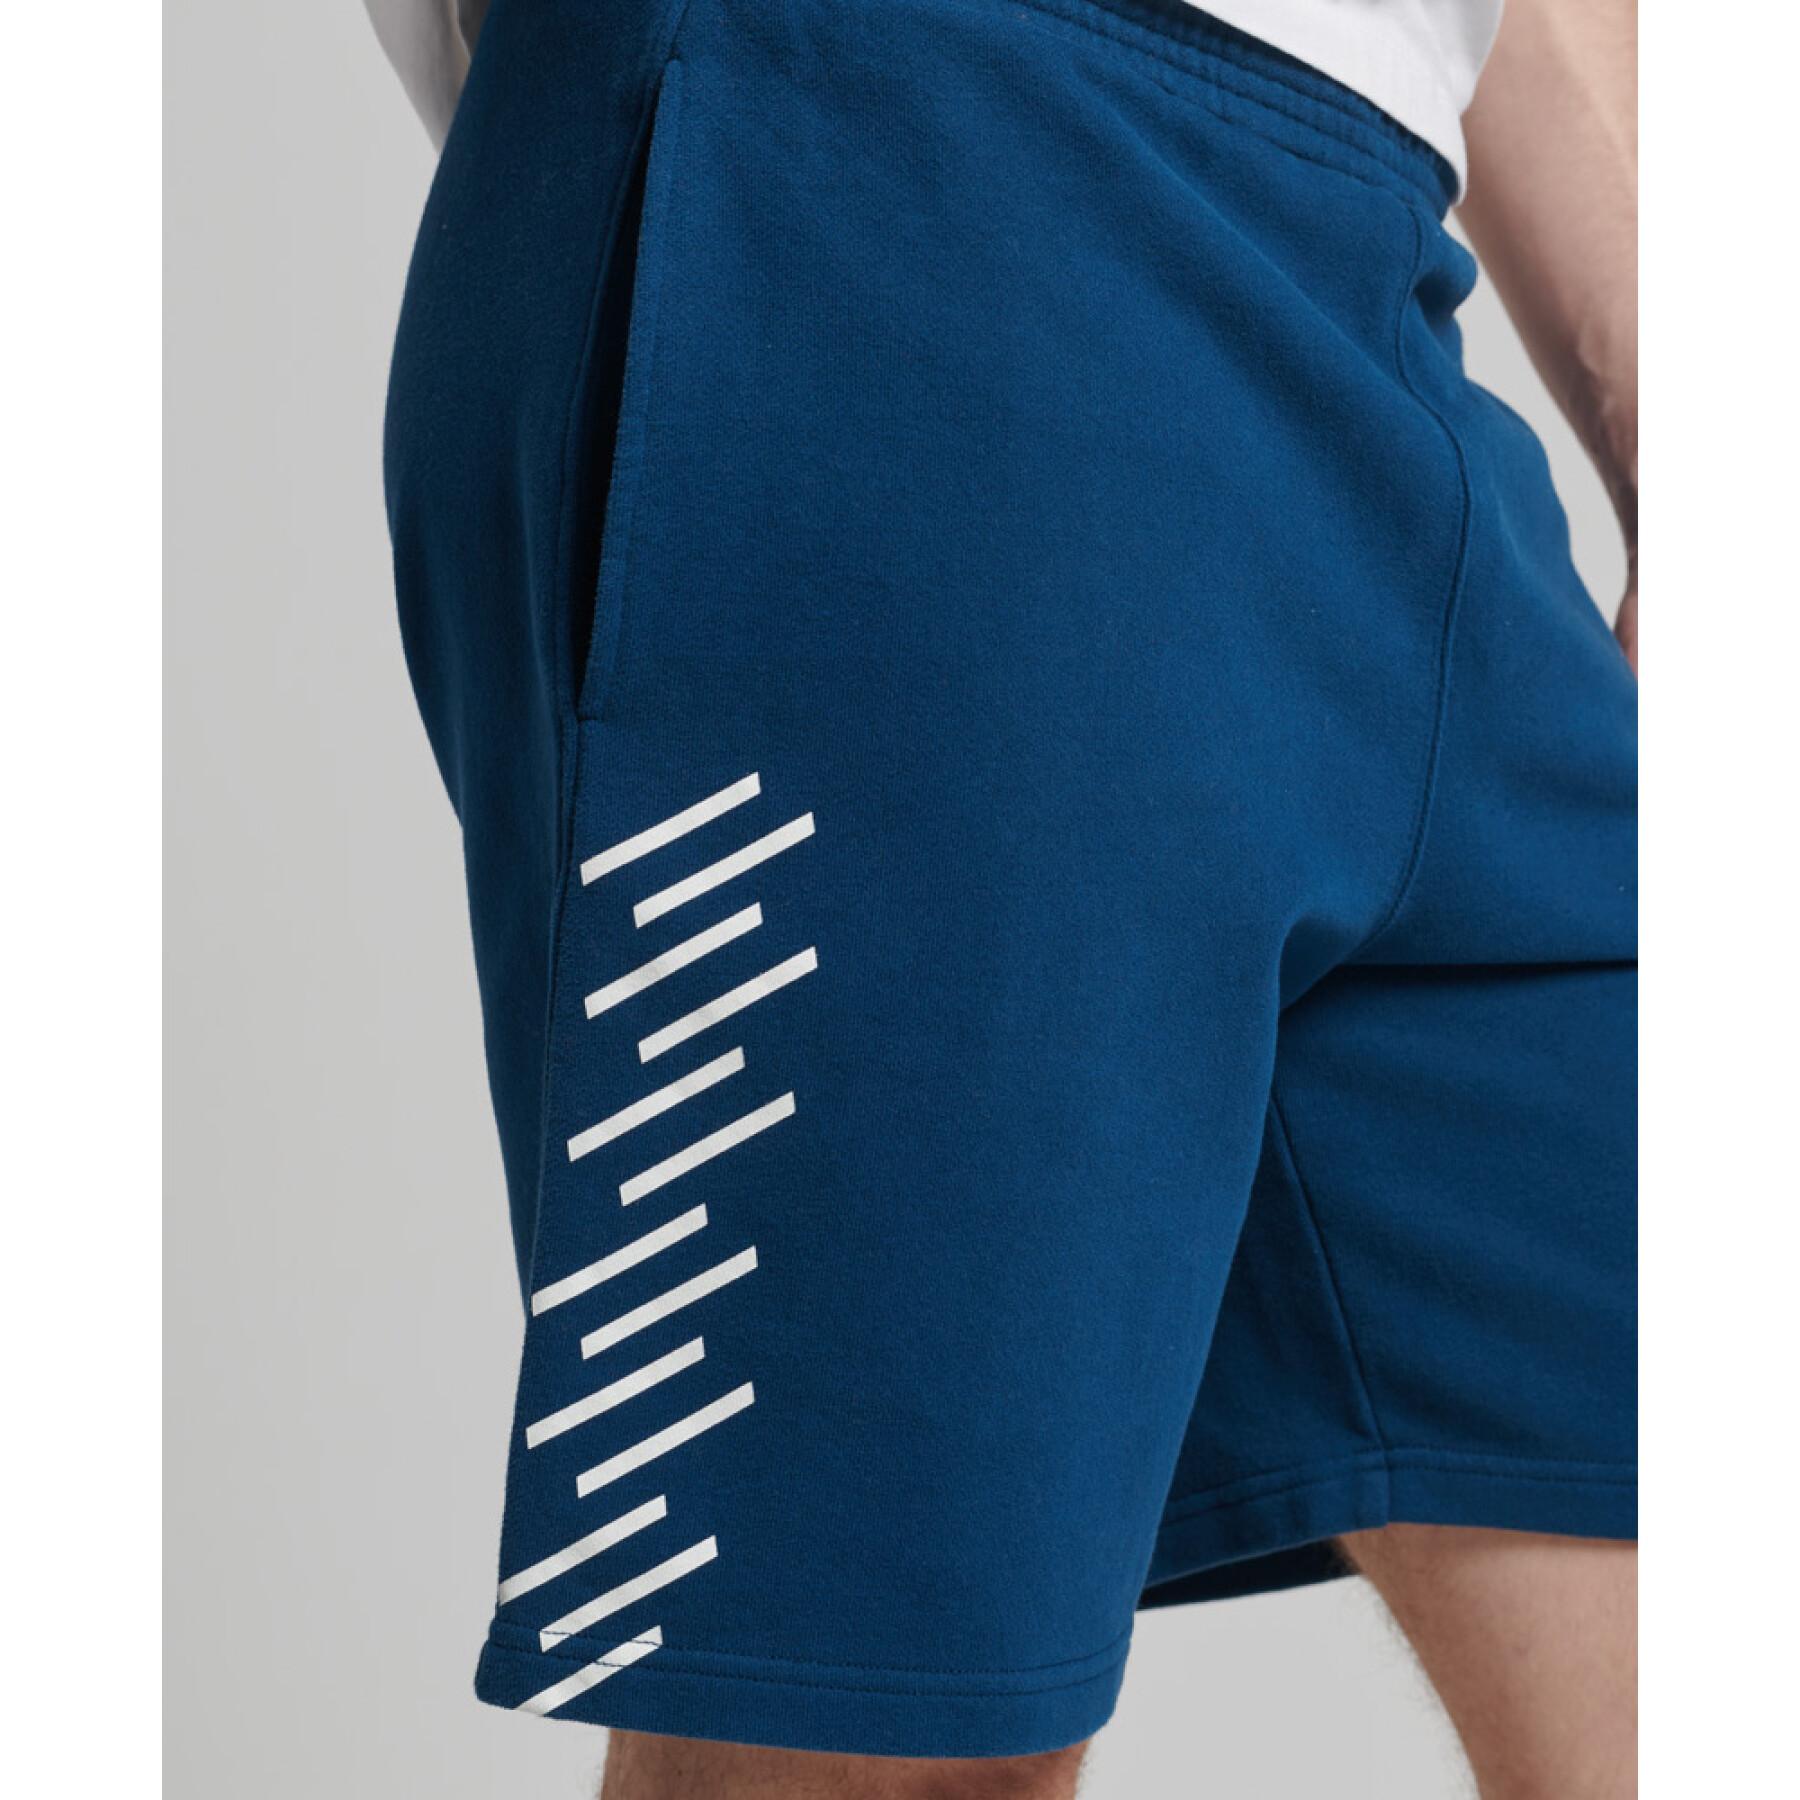 Shorts Superdry Code Core